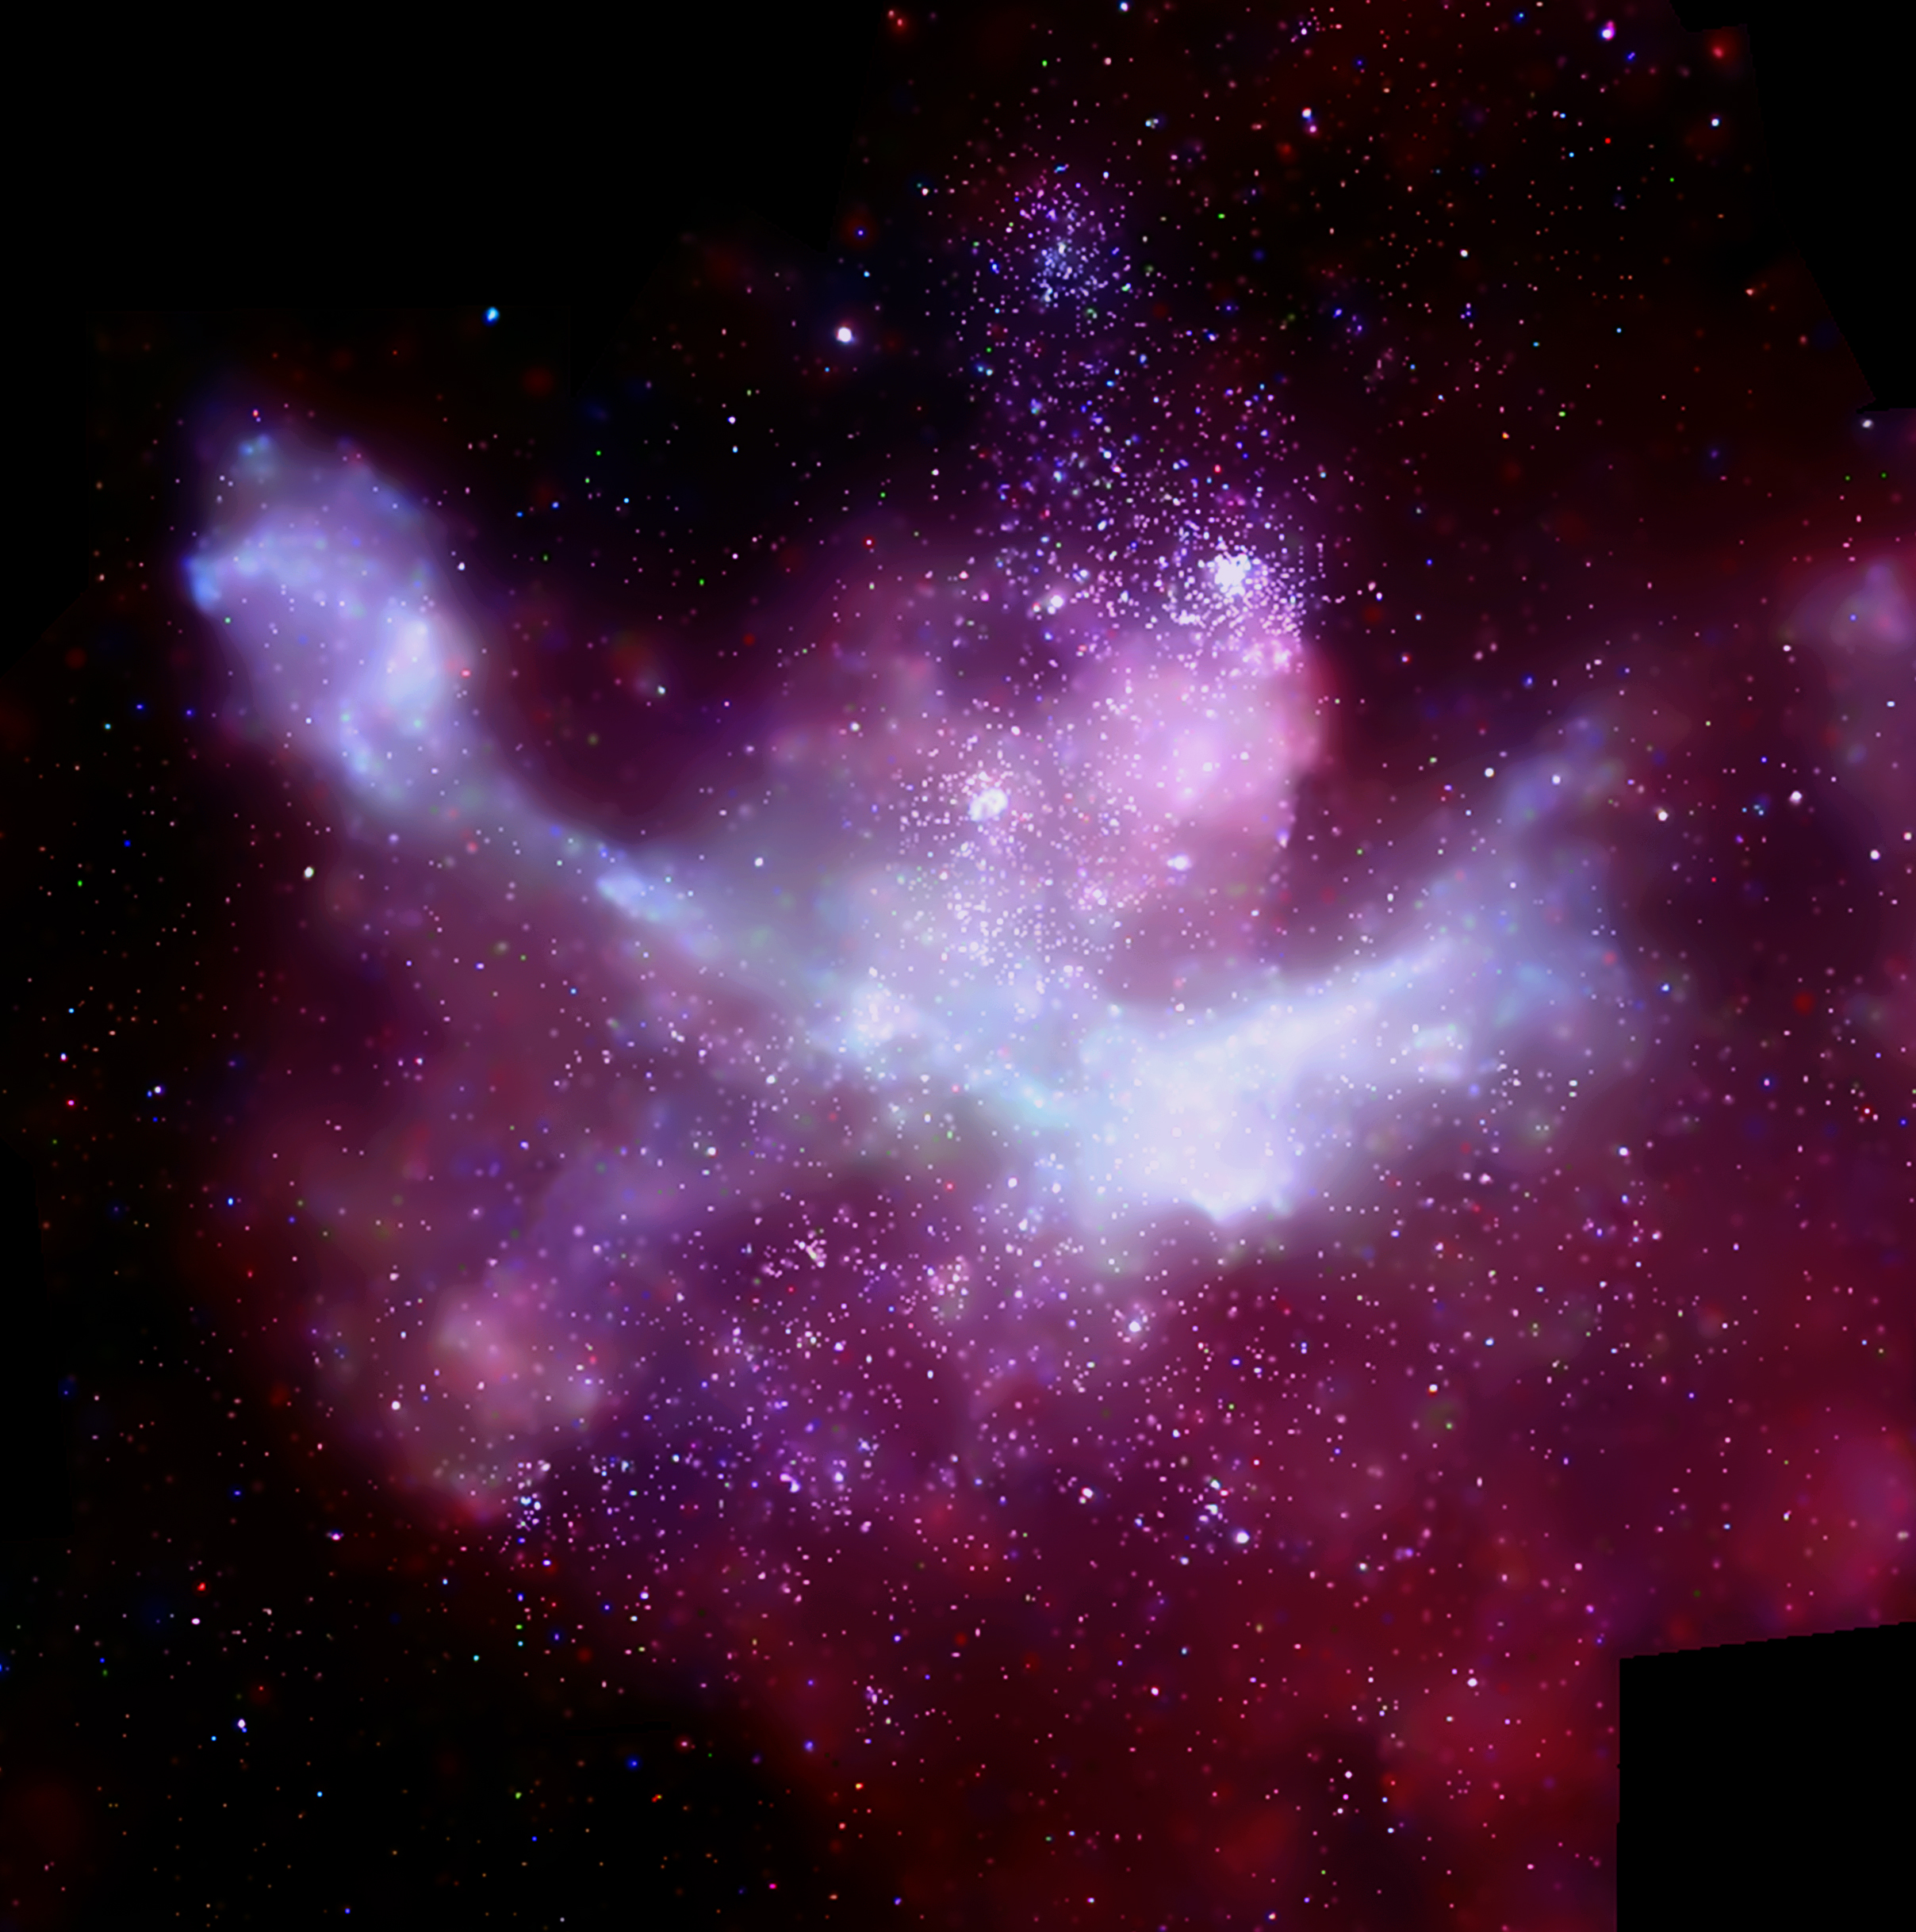 An astronomical image showing reddish-purple clouds with thousands of individual points of light. 